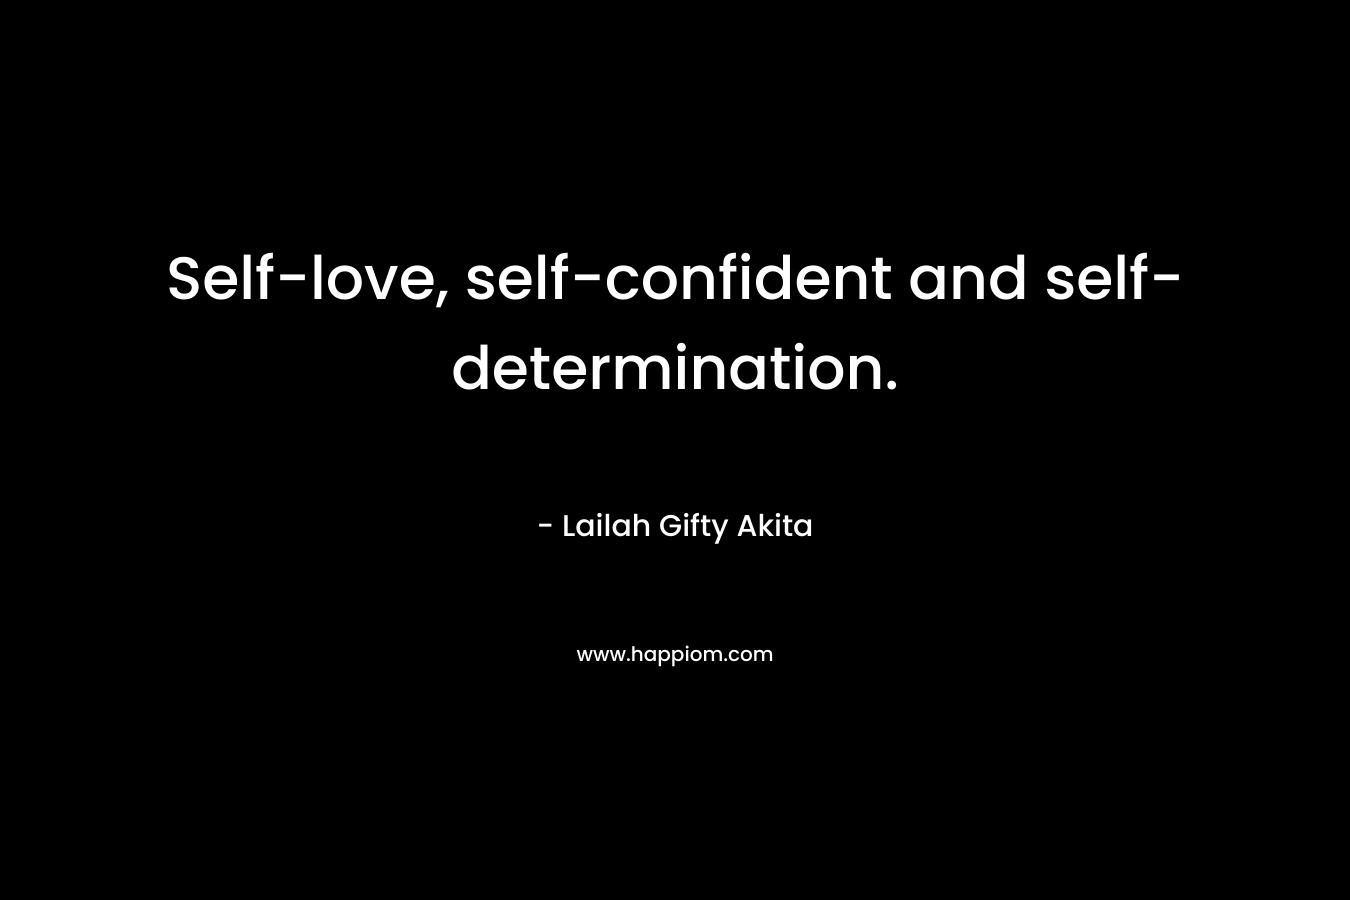 Self-love, self-confident and self-determination. – Lailah Gifty Akita